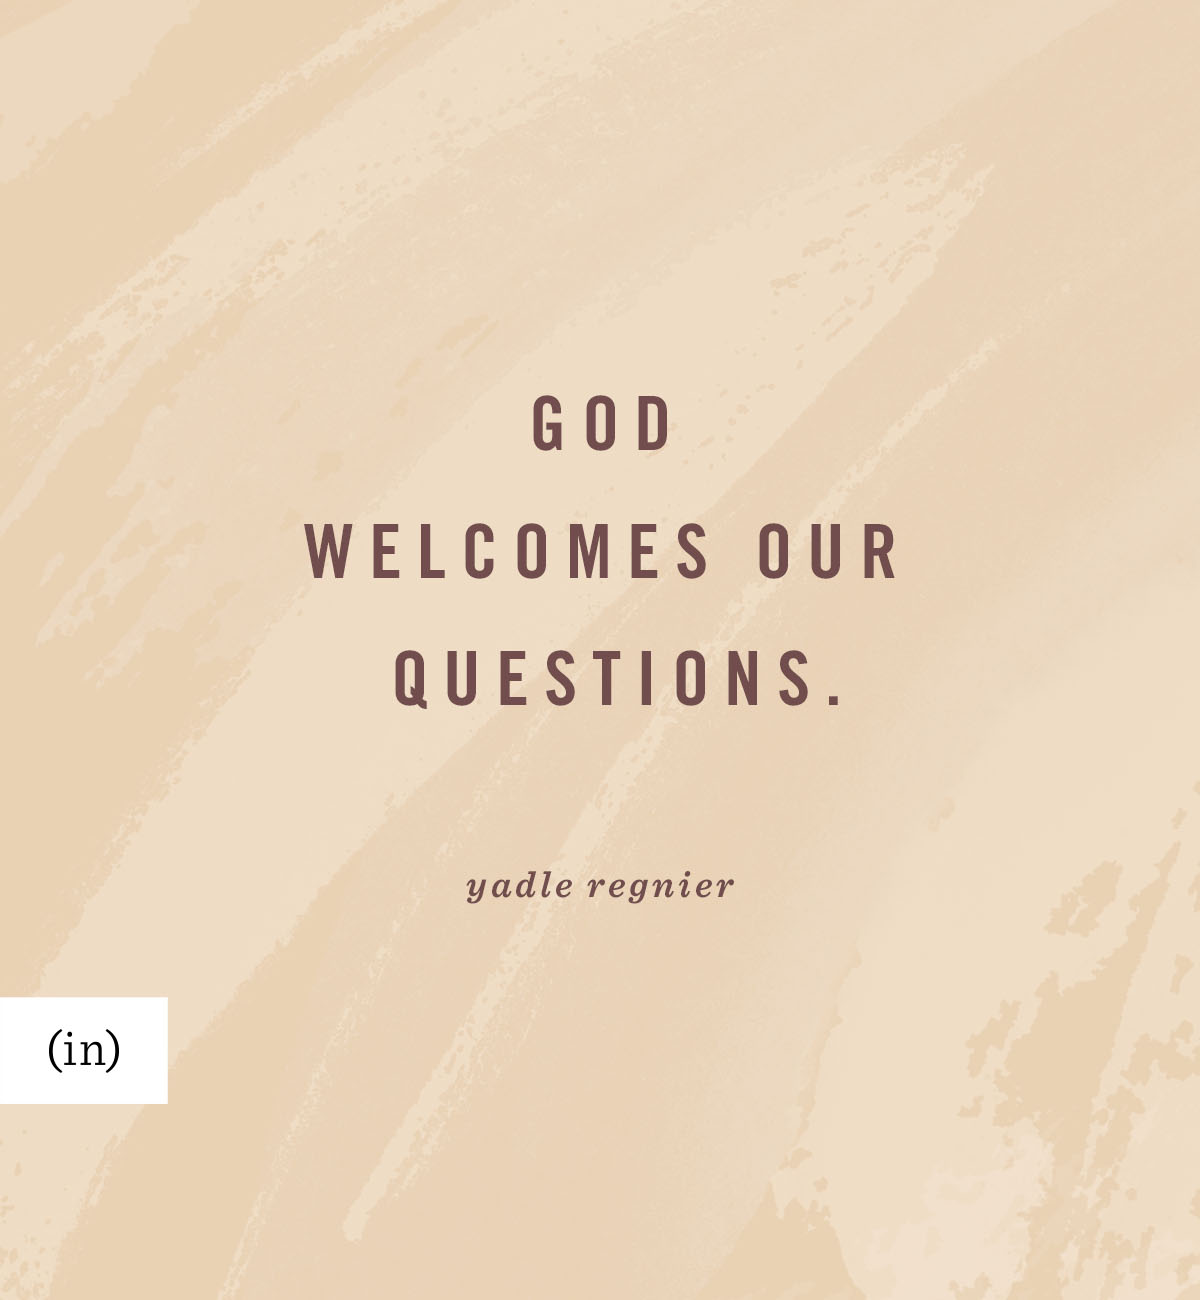 God welcomes our questions. -Yadle Regnier